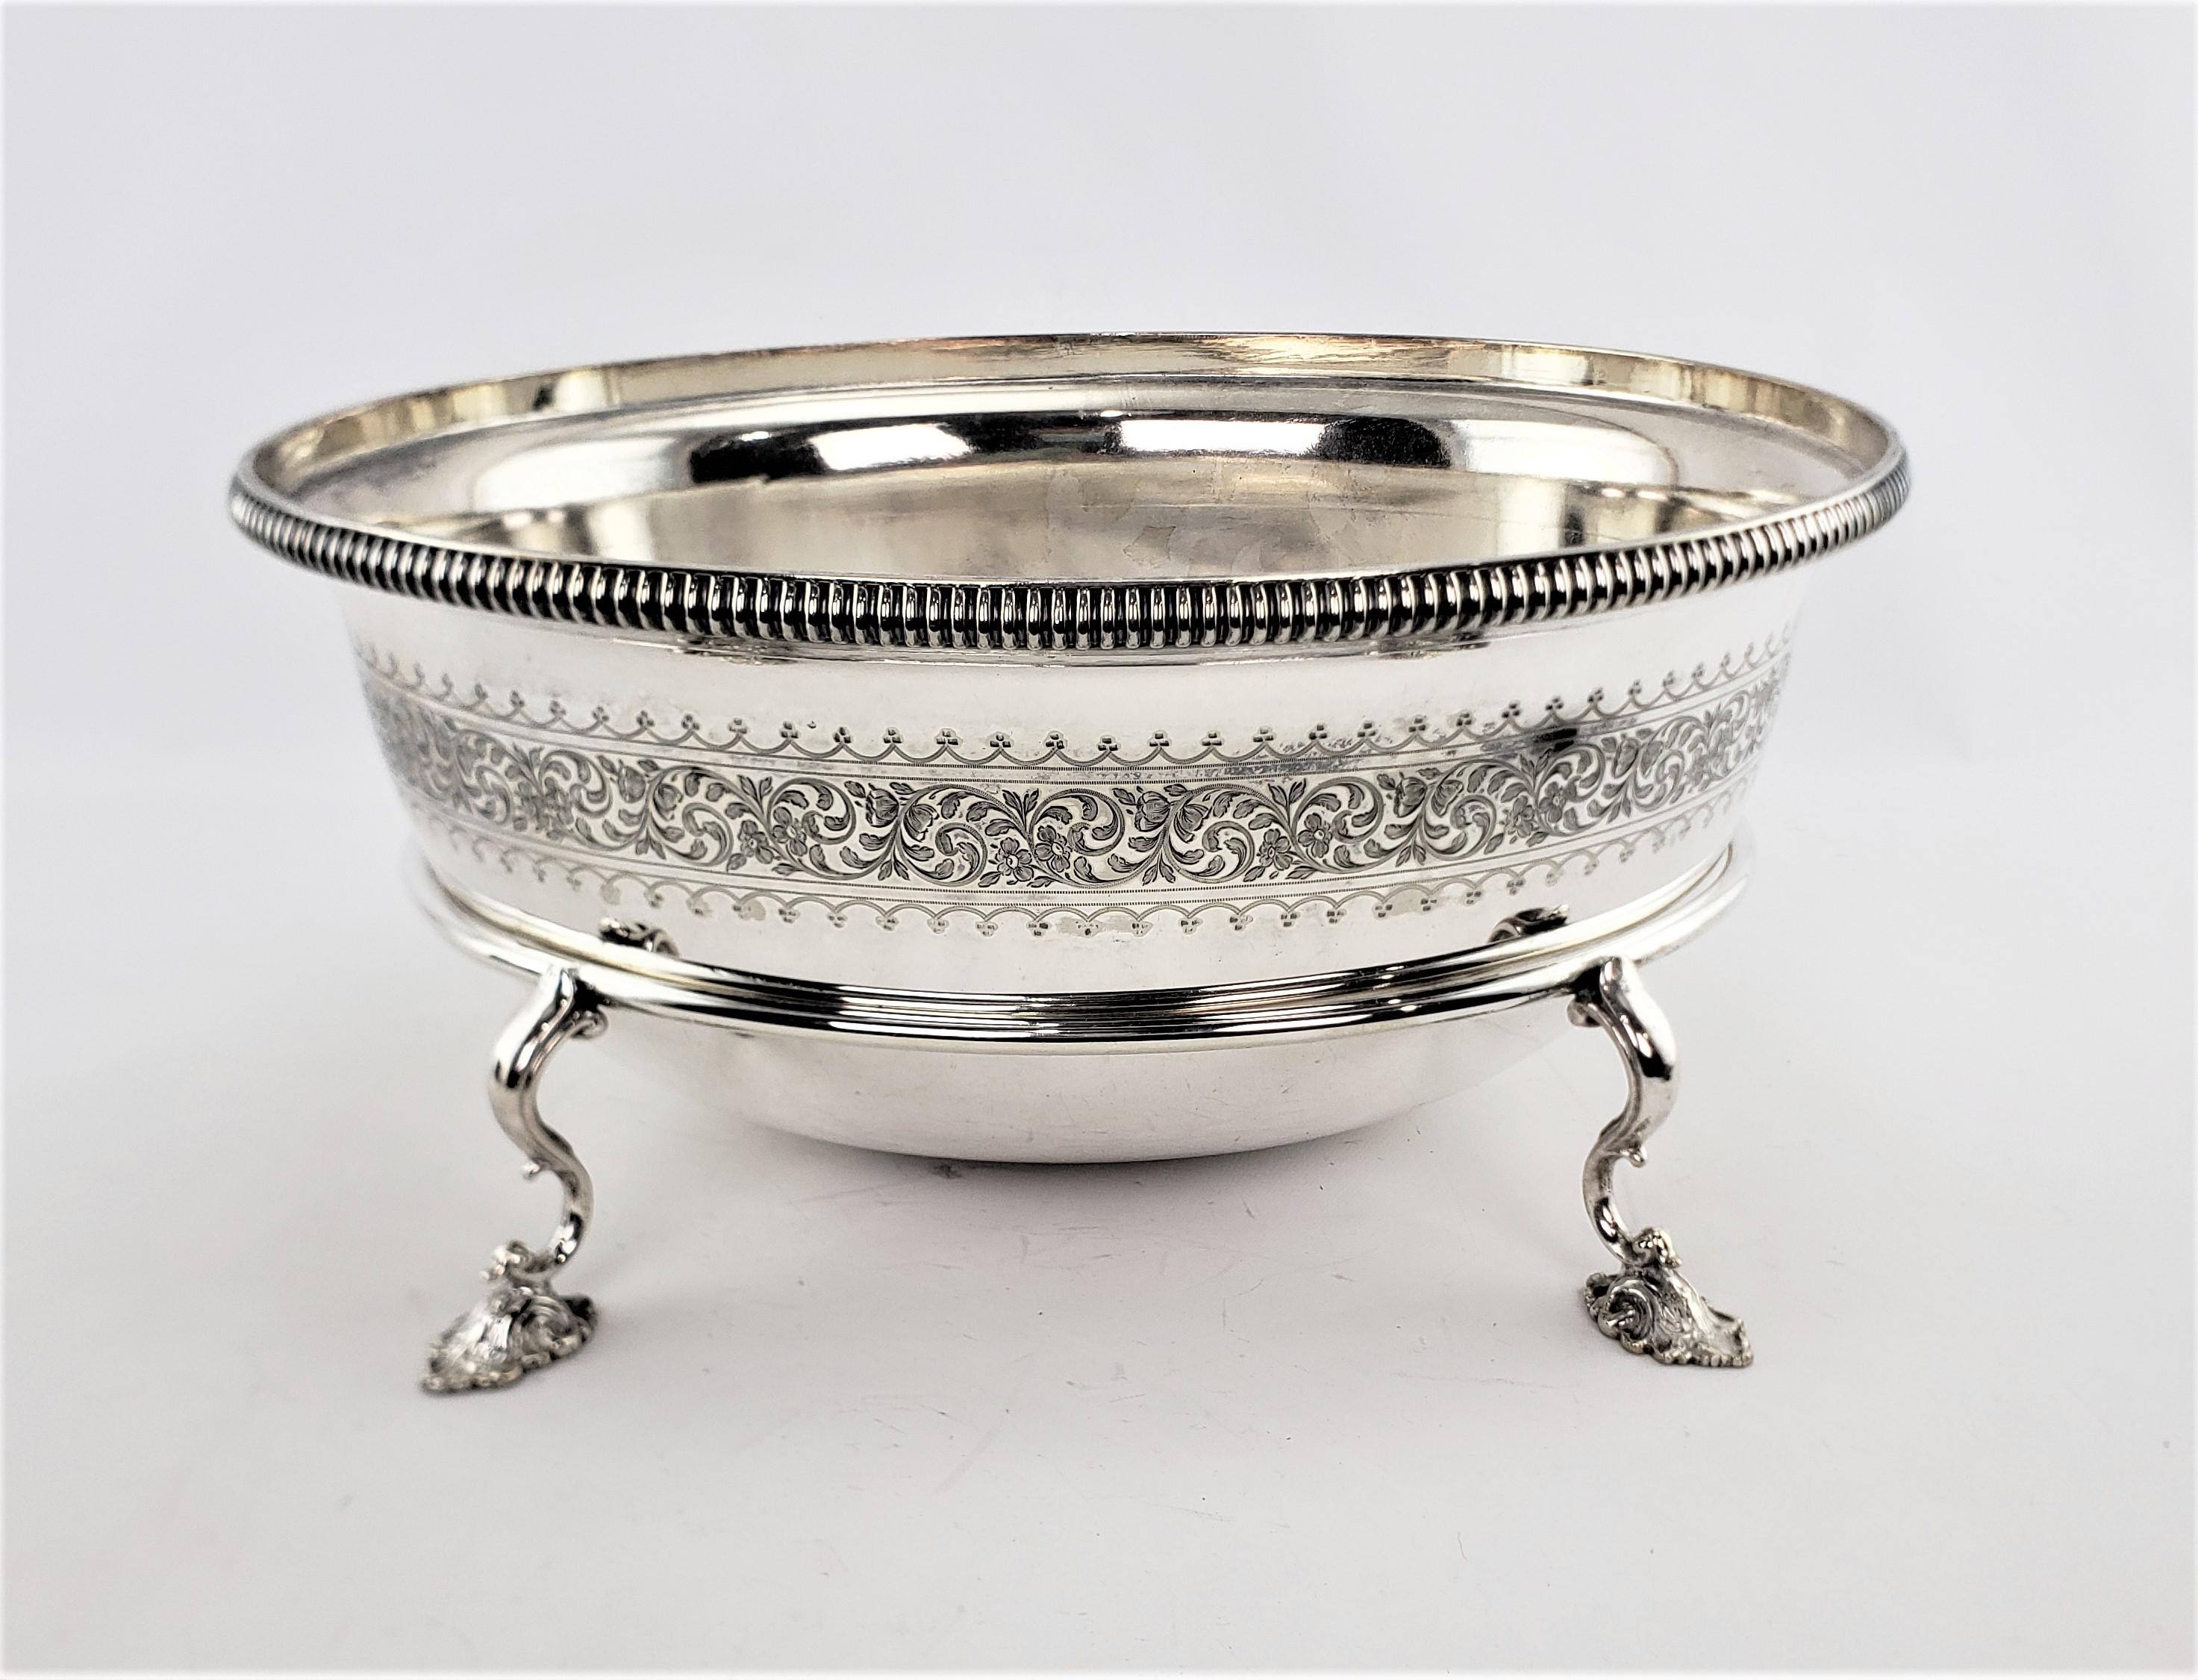 Victorian Antique Silver Plated Converted Meat Dome Ice Trough, Wine Cooler or Centerpiece For Sale